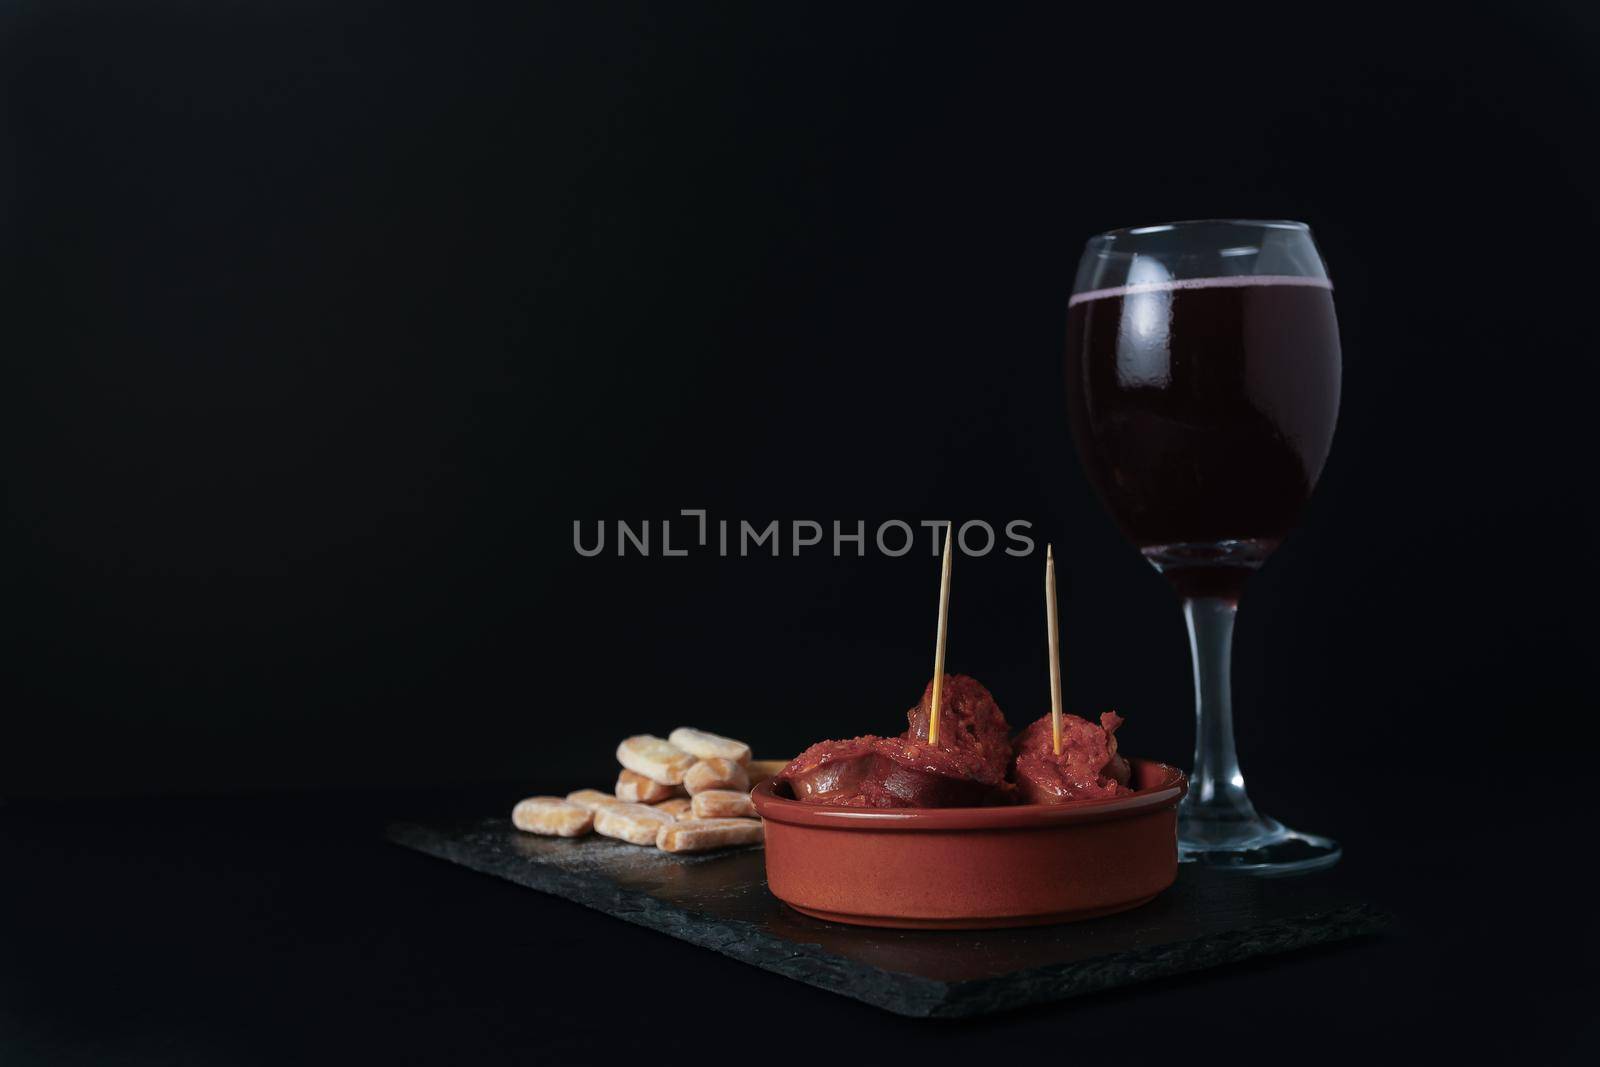 close-up of a tapa of chorizo in sauce, typical Spanish sausage with bread and summer red wine isolated on black background